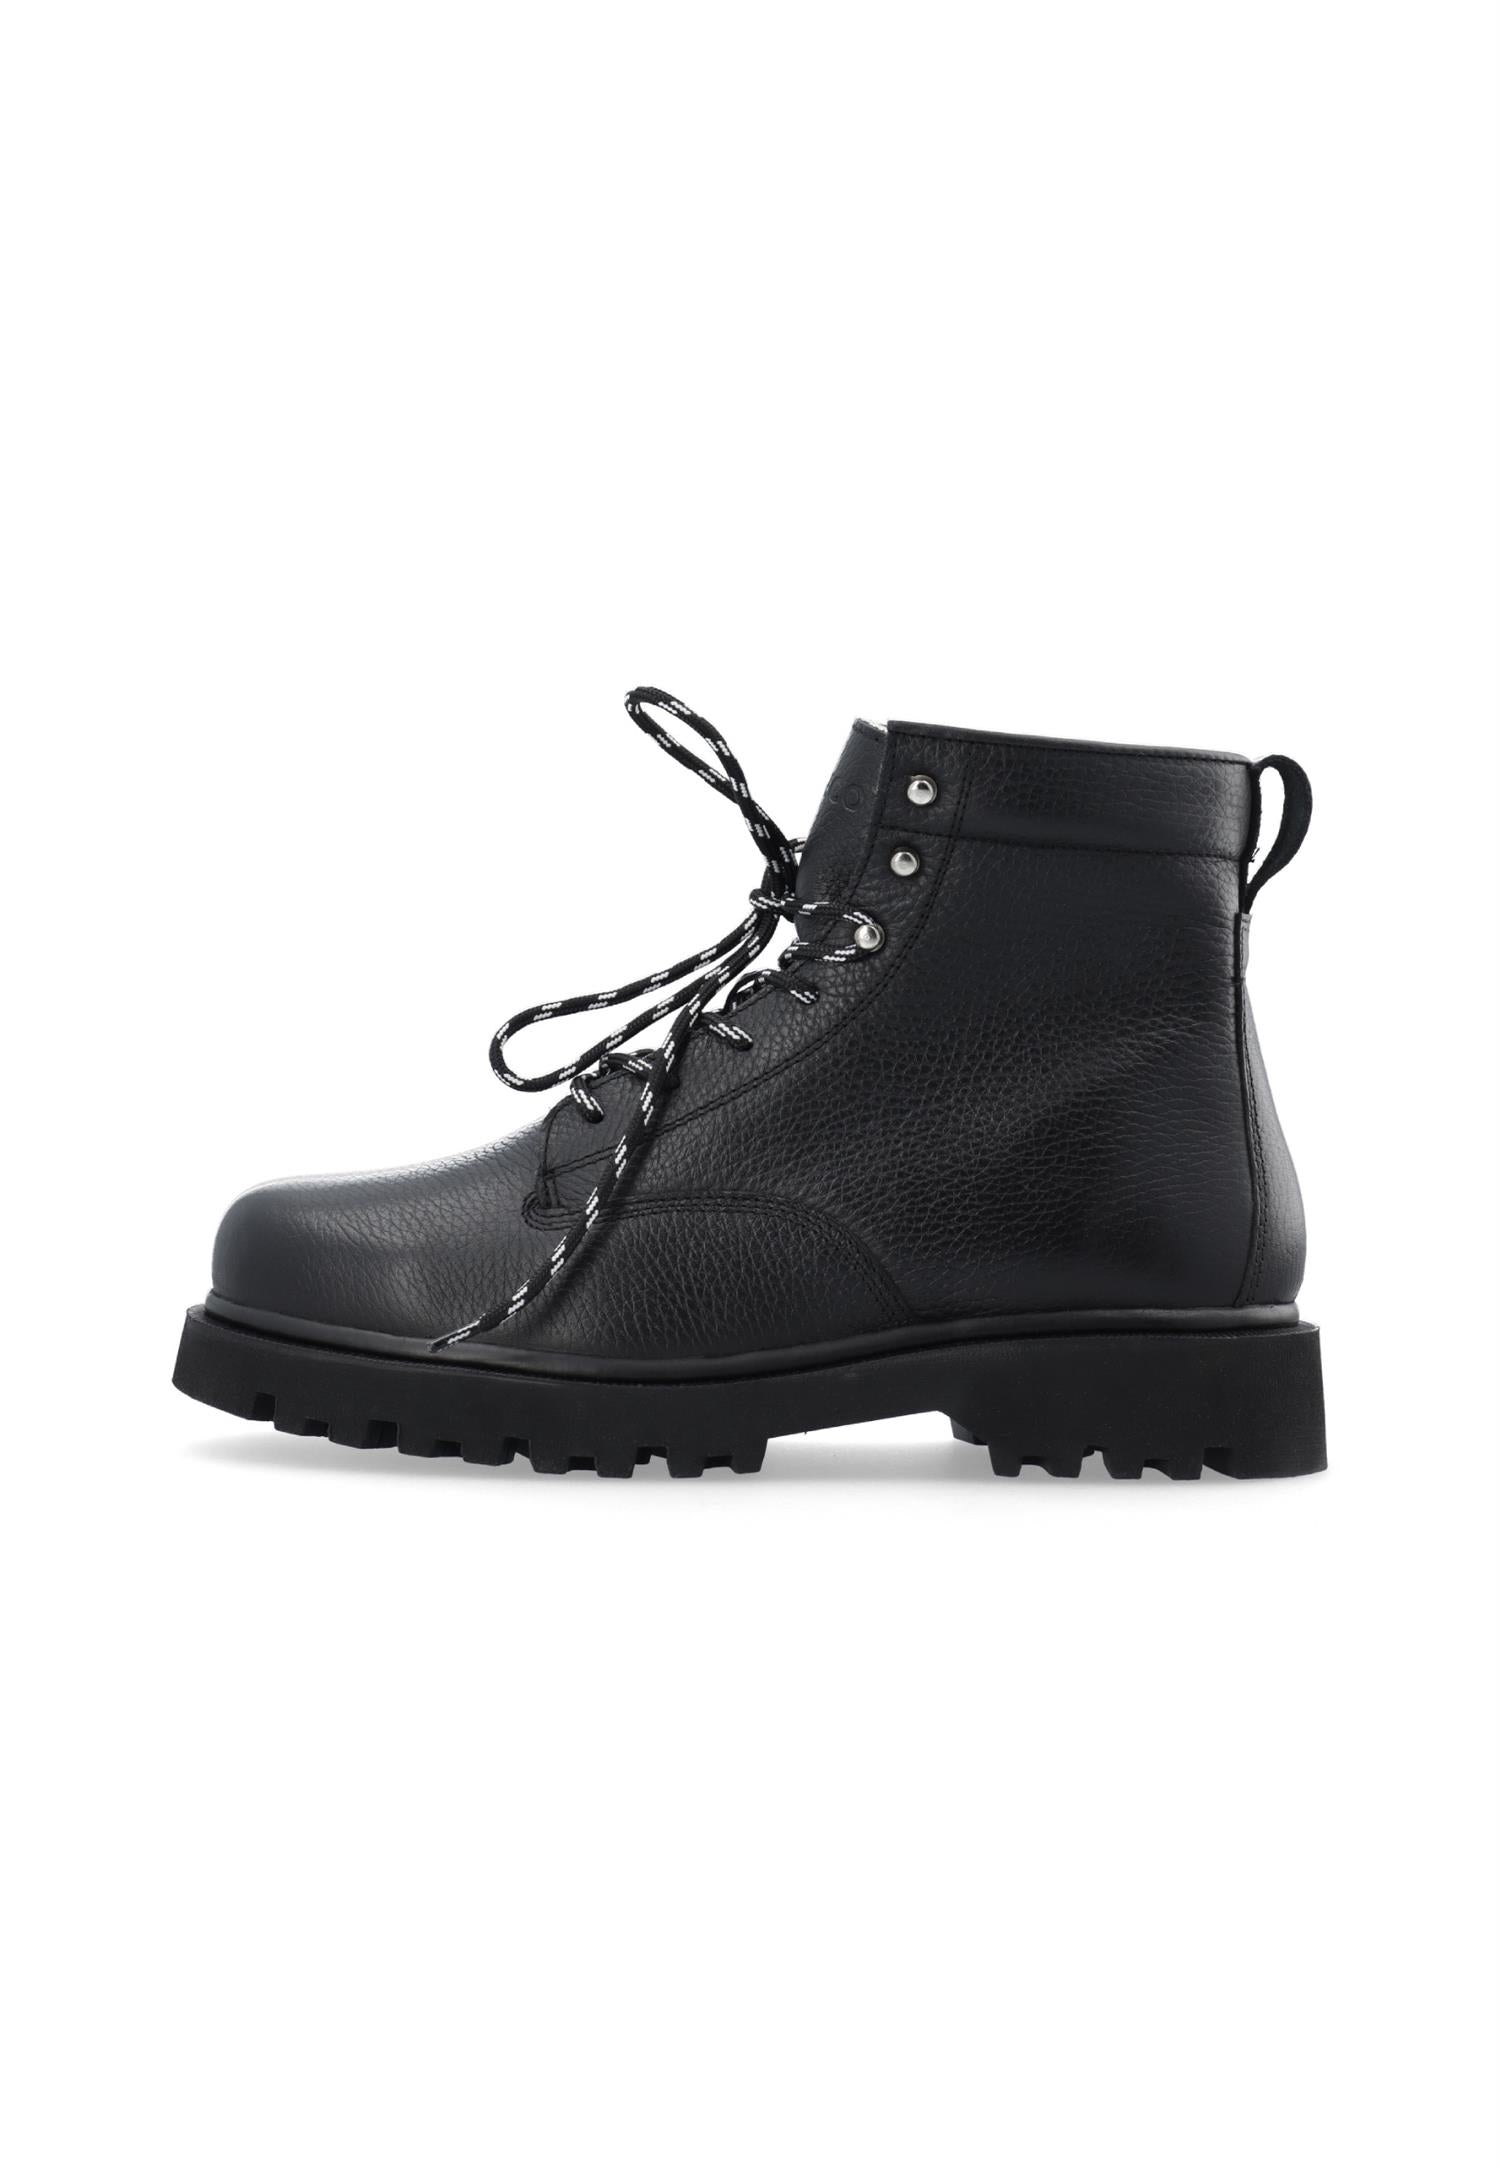 BIAPATRICK Laced Up Boot Black